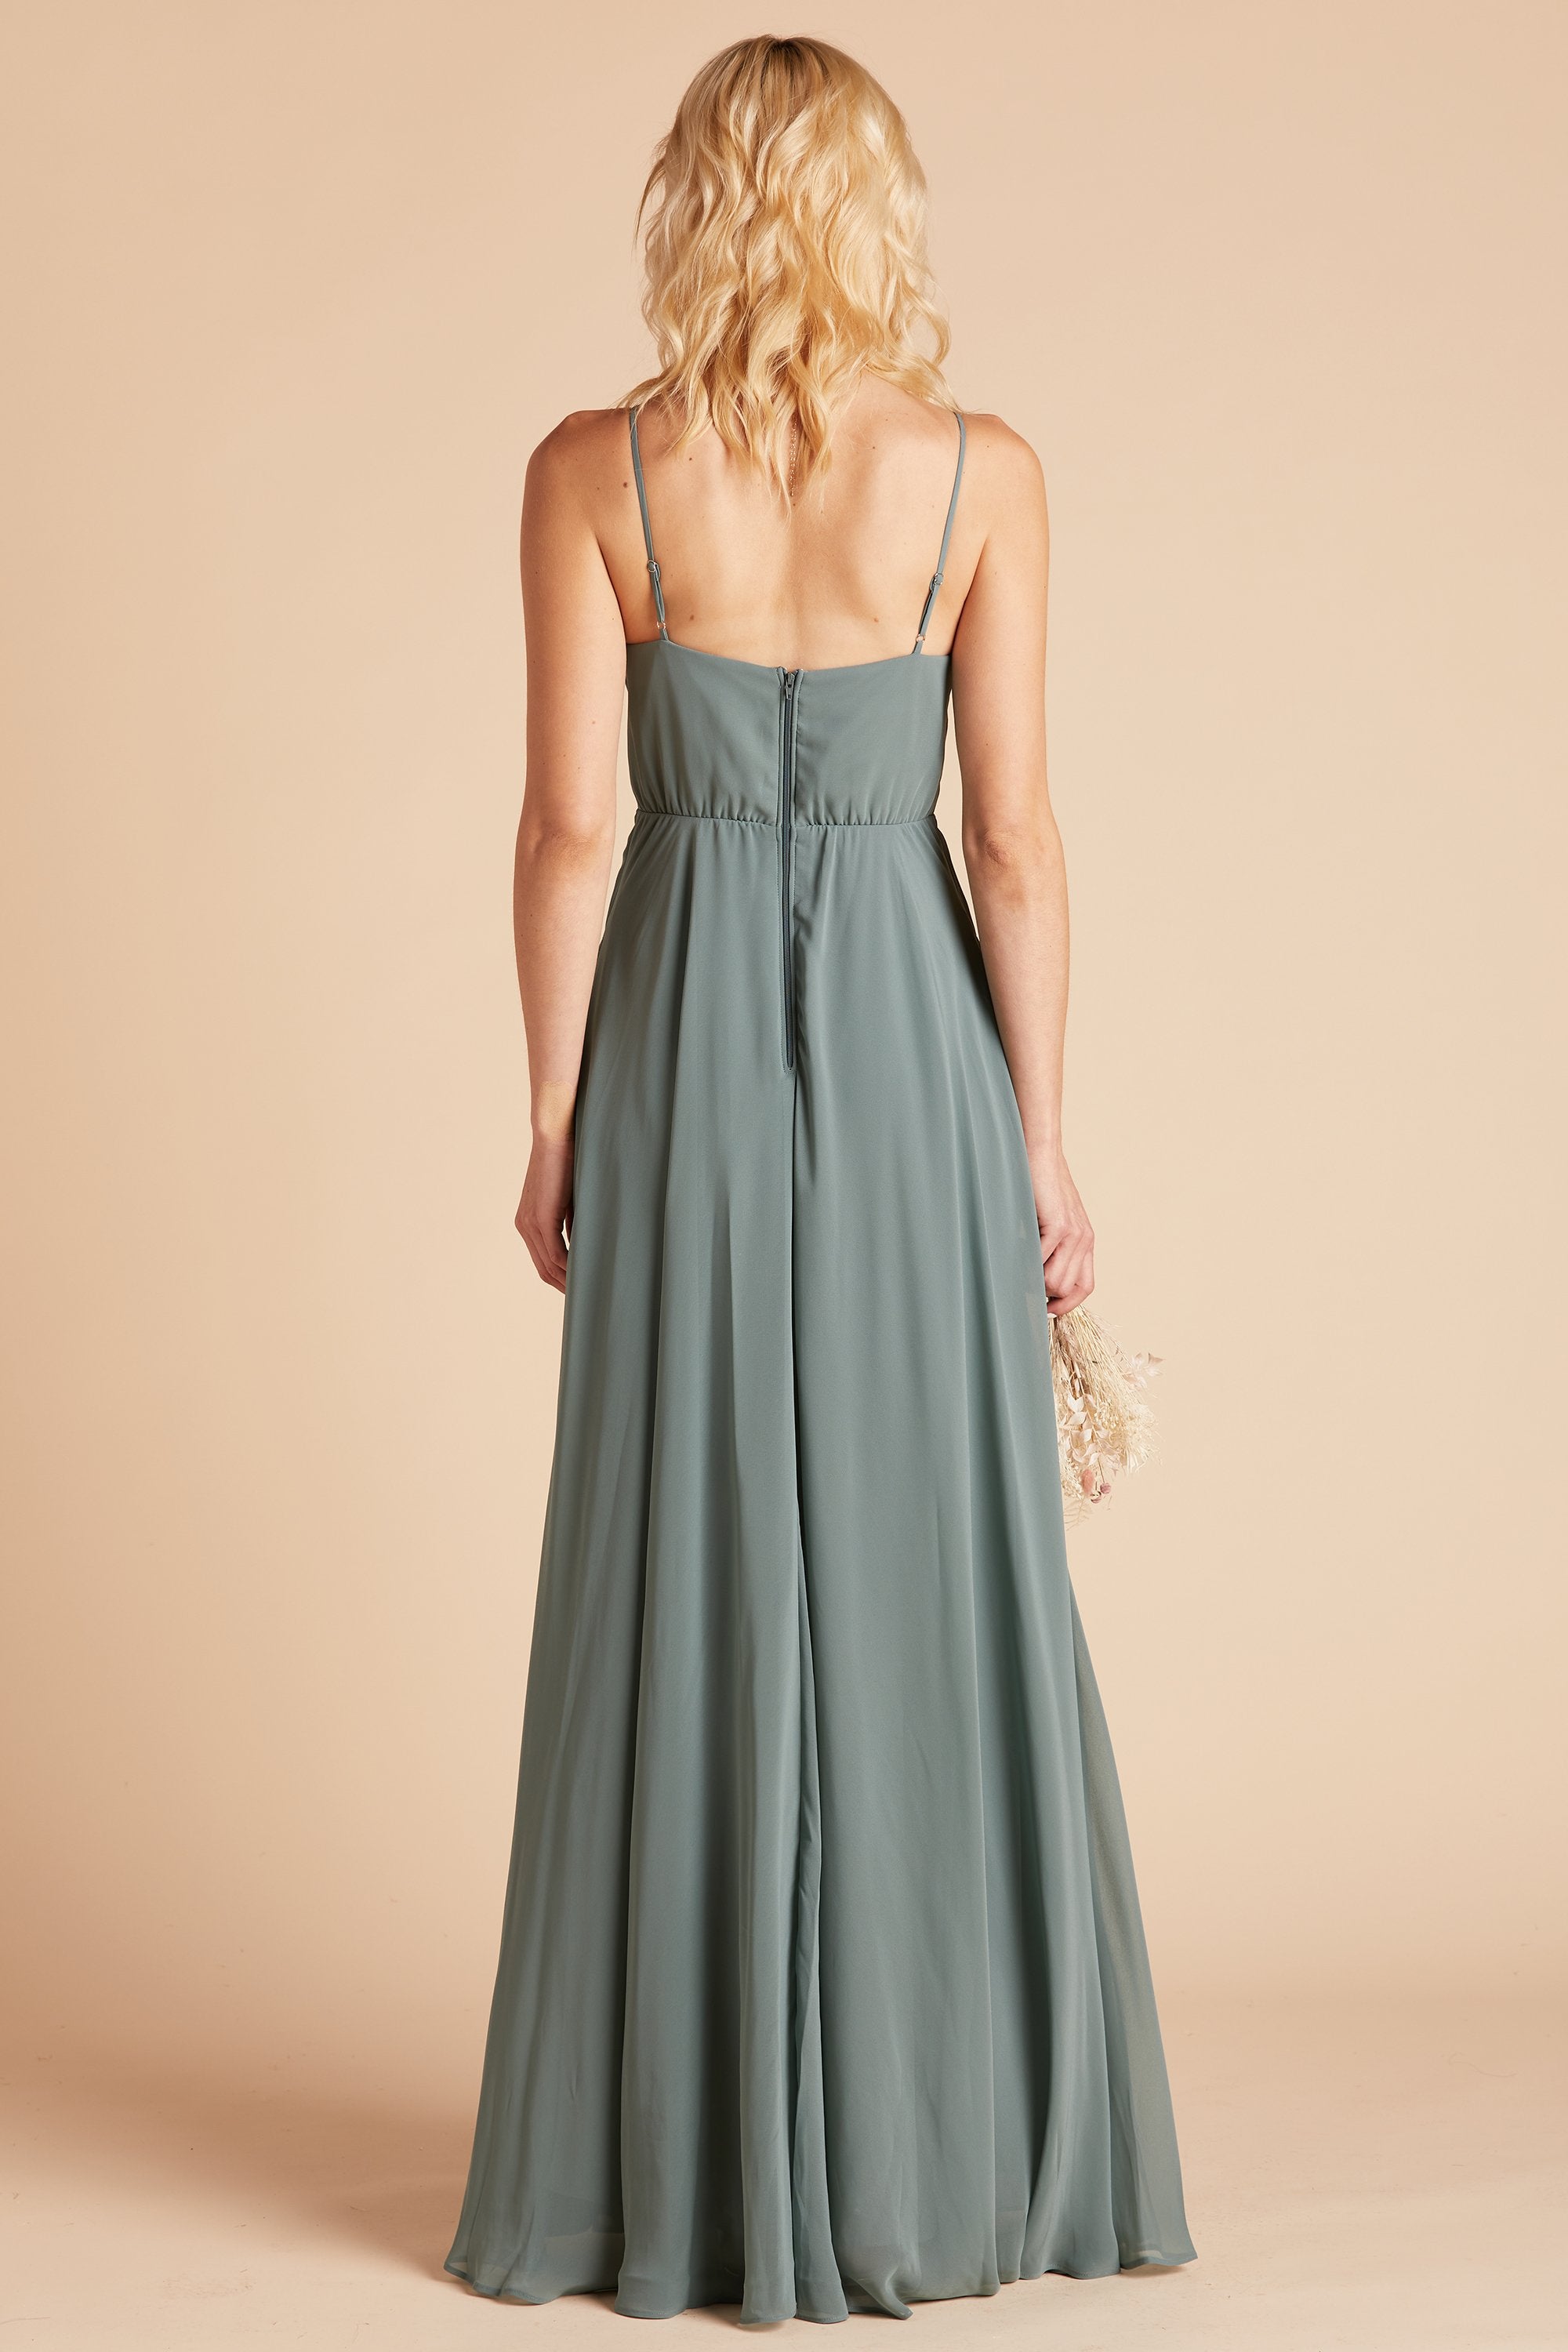 Back view of the Kaia Dress in sea glass chiffon shows the hook and eye closure and zipper in the center seam of the dress bodice and skirt. 